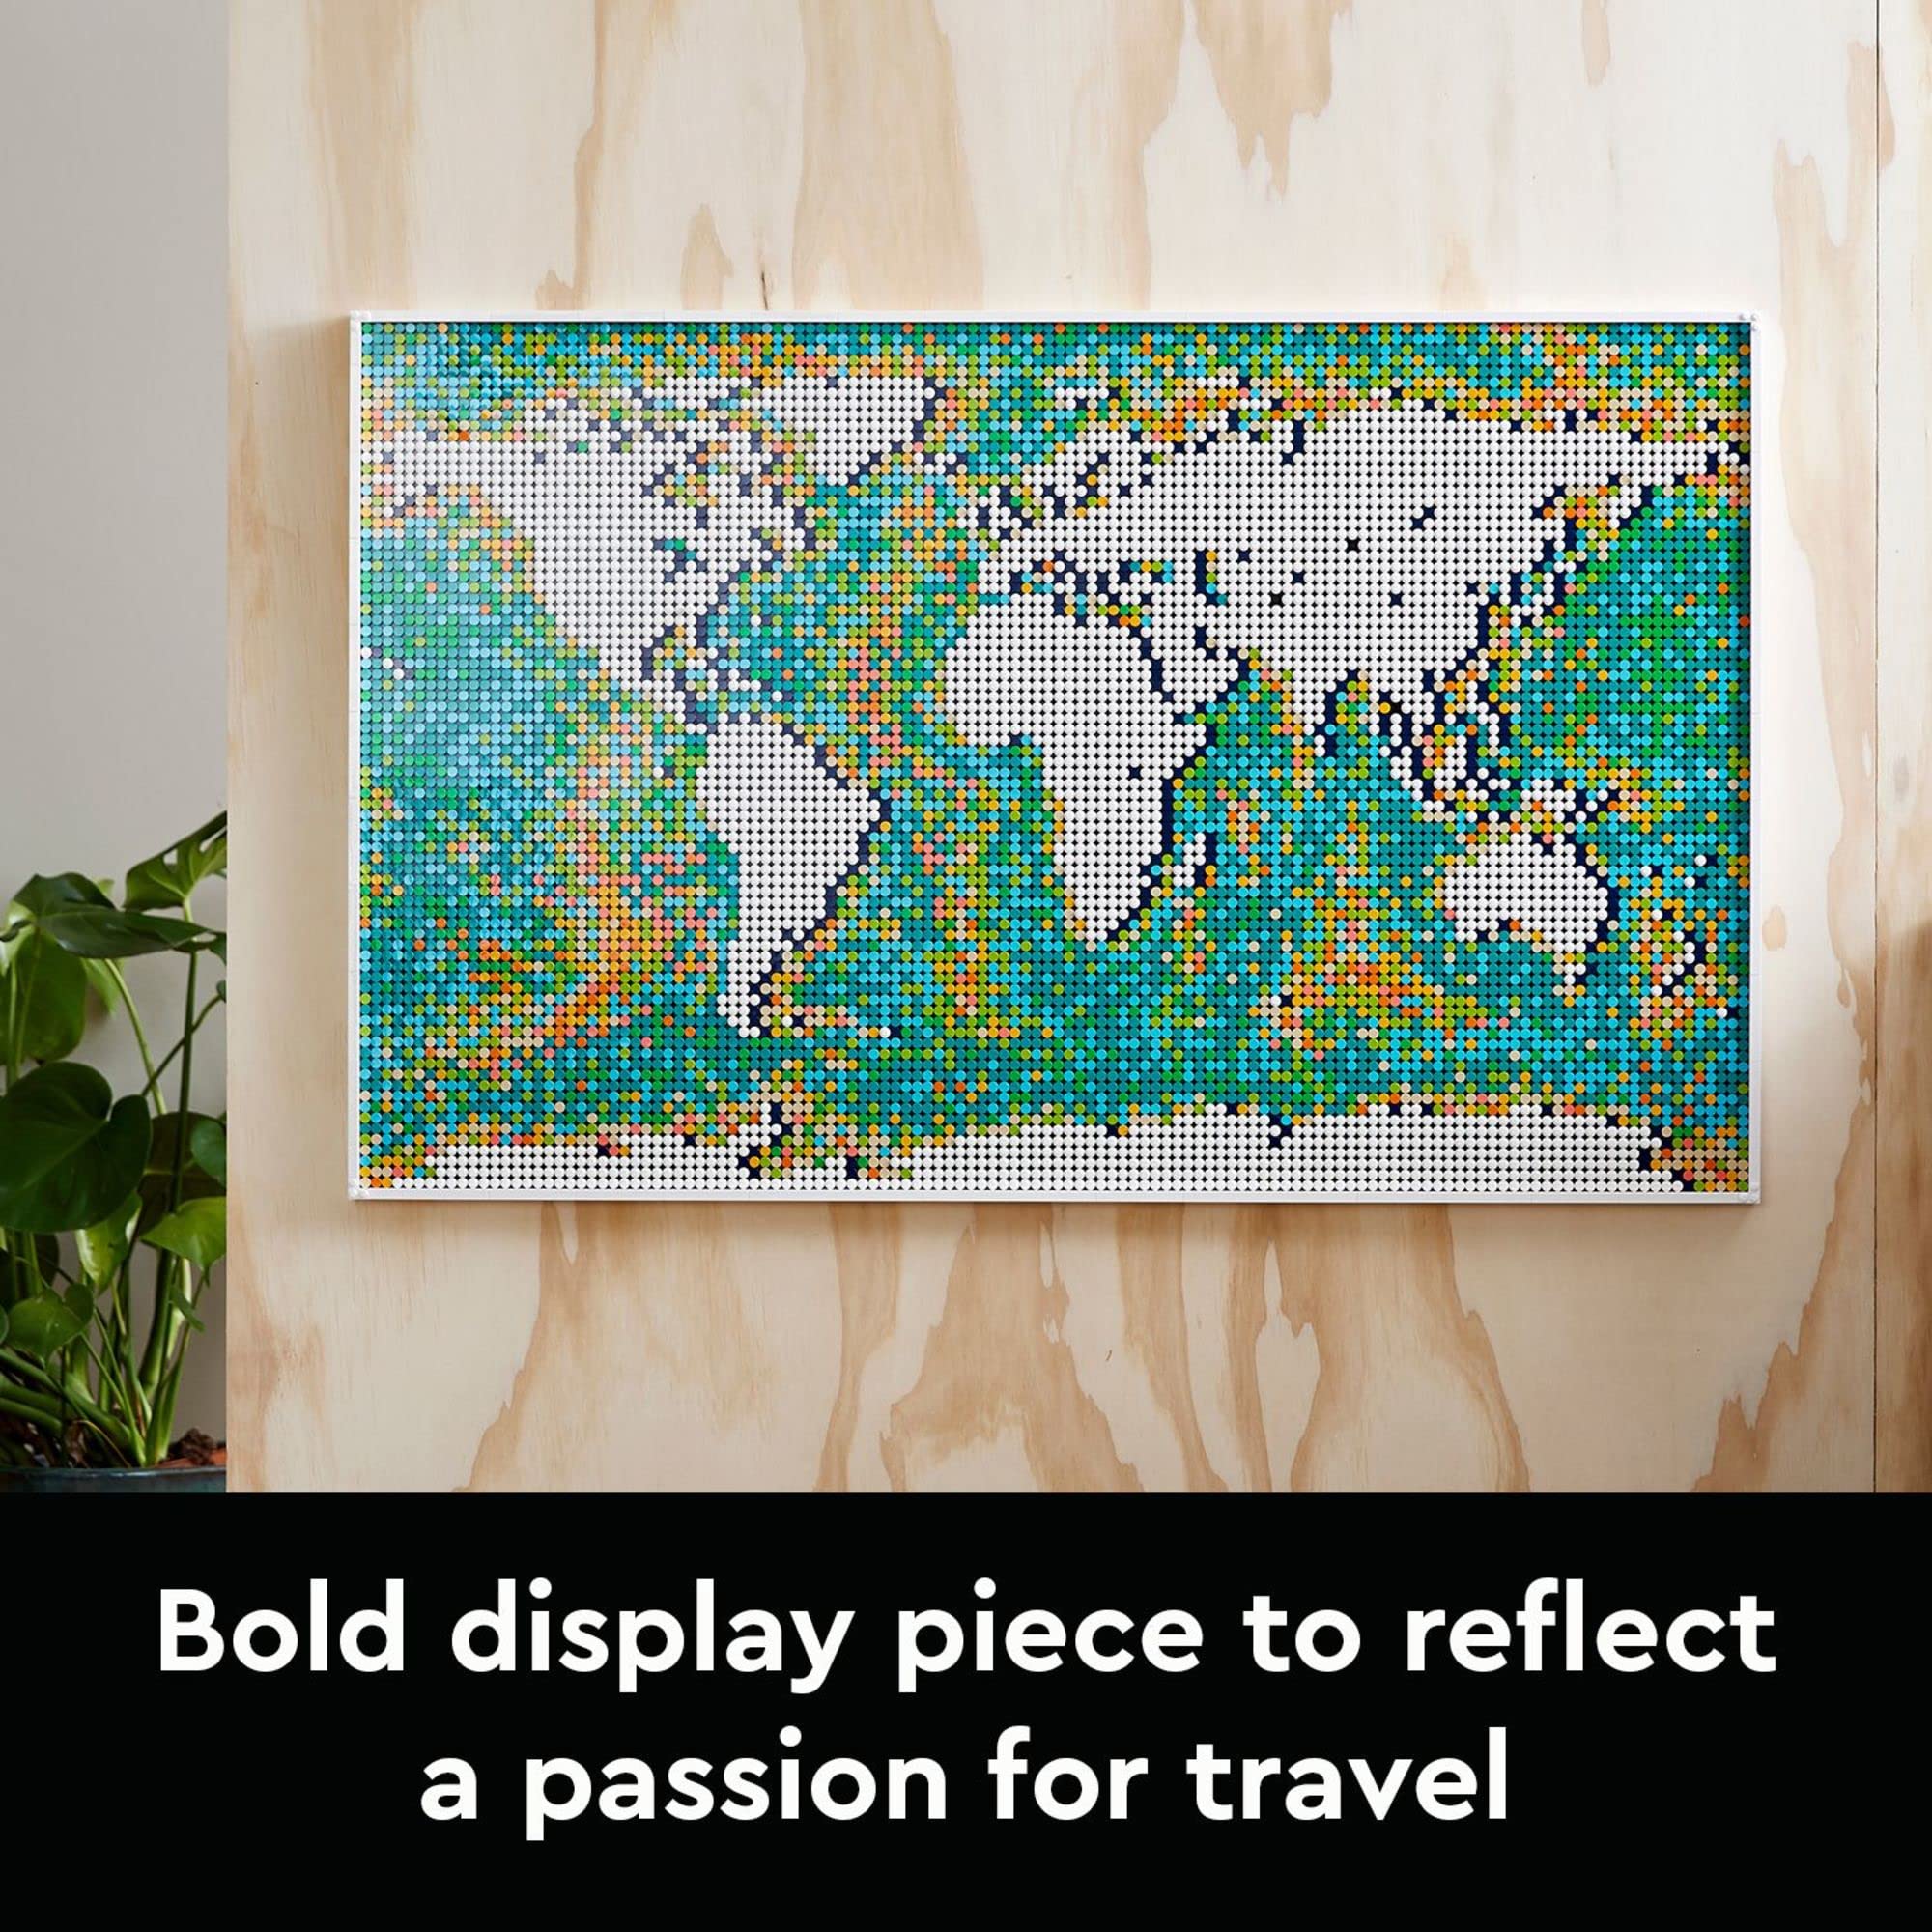 LEGO Art World Map 31203 Building Set - Collectibe Wall Art for Adults, Featuring Accompanying Soundtrack, Great Home Office Decor for Passionate Travelers, DIY Creators, and Map Enthusiasts